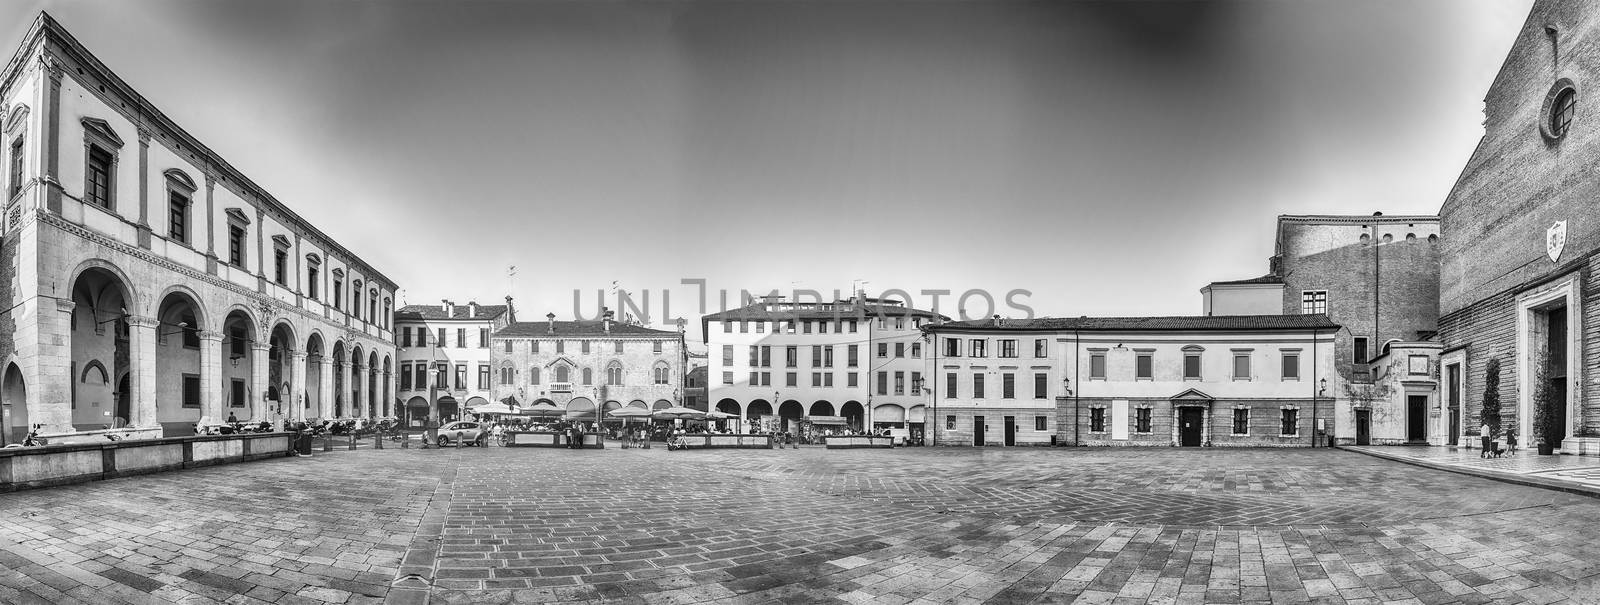 Panoramic view of Piazza Duomo, central square in Padua, Italy by marcorubino